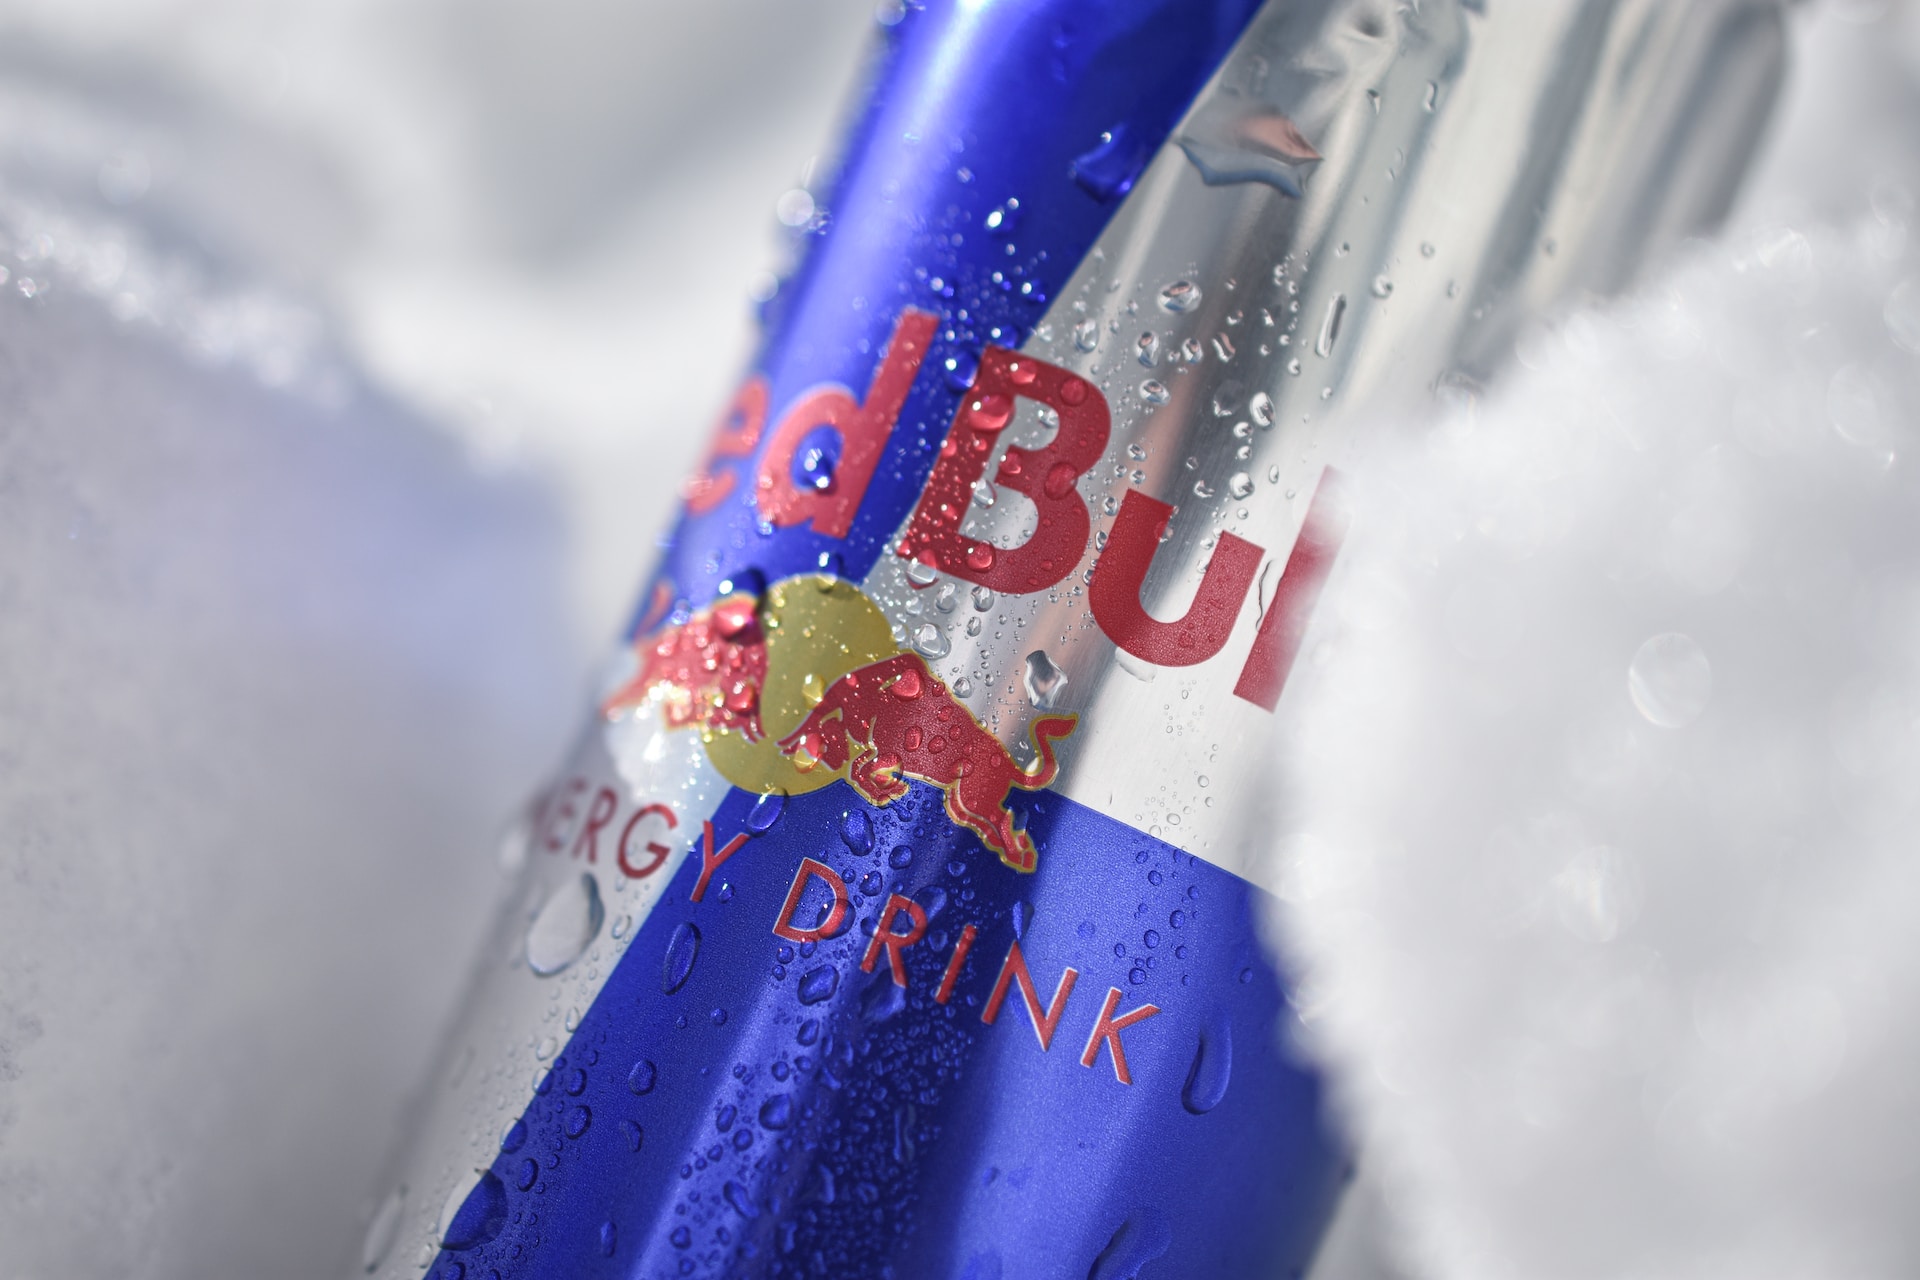 19 Facts About Red Bull That'll Actually Give You Wings! - The